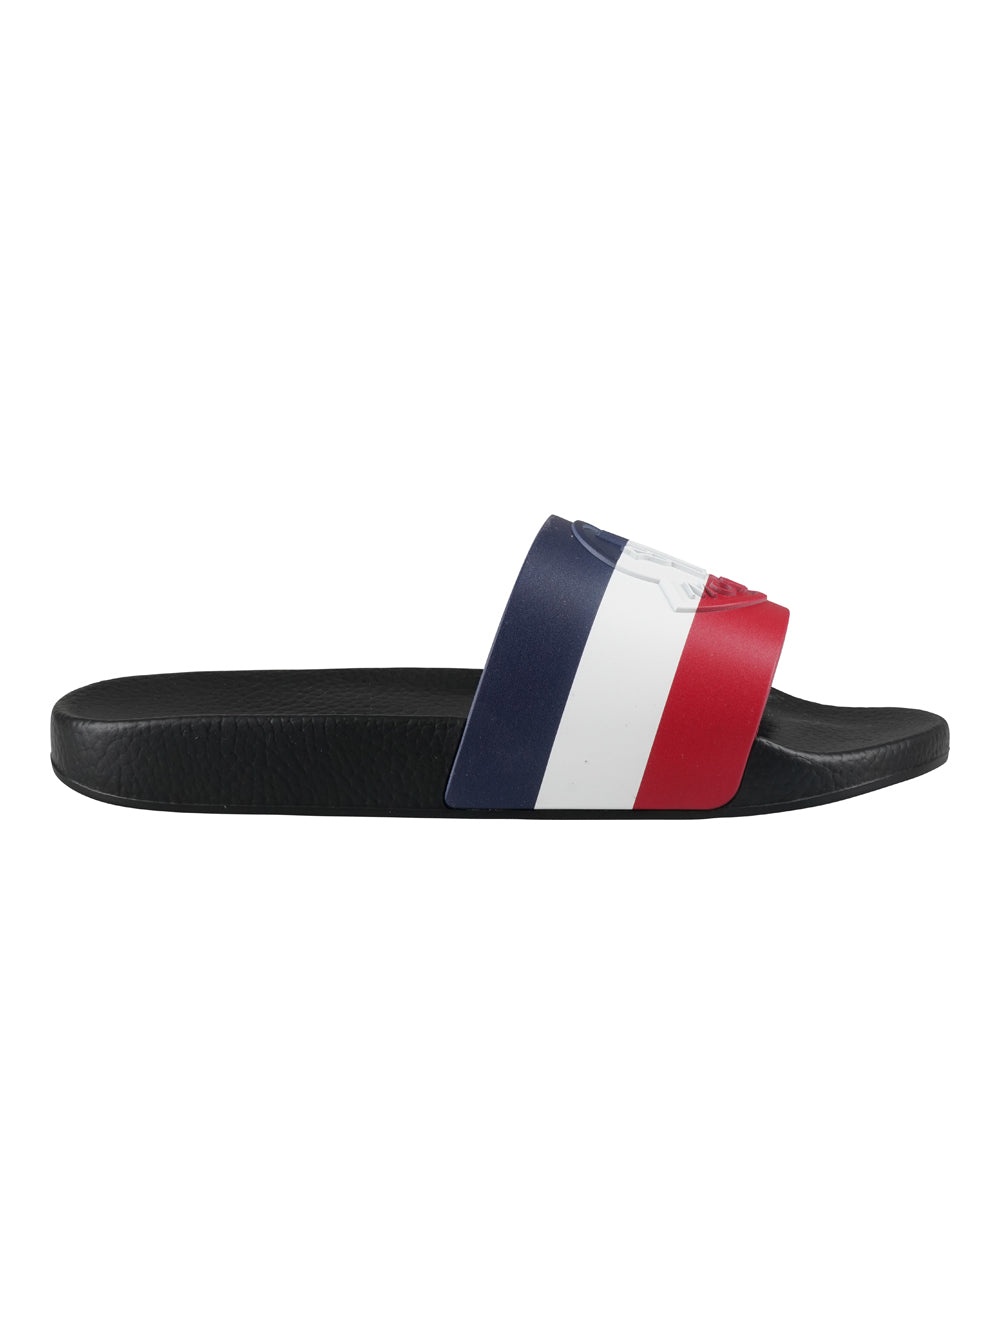 MONCLER MULTICOLOR SLIPPERS - 10